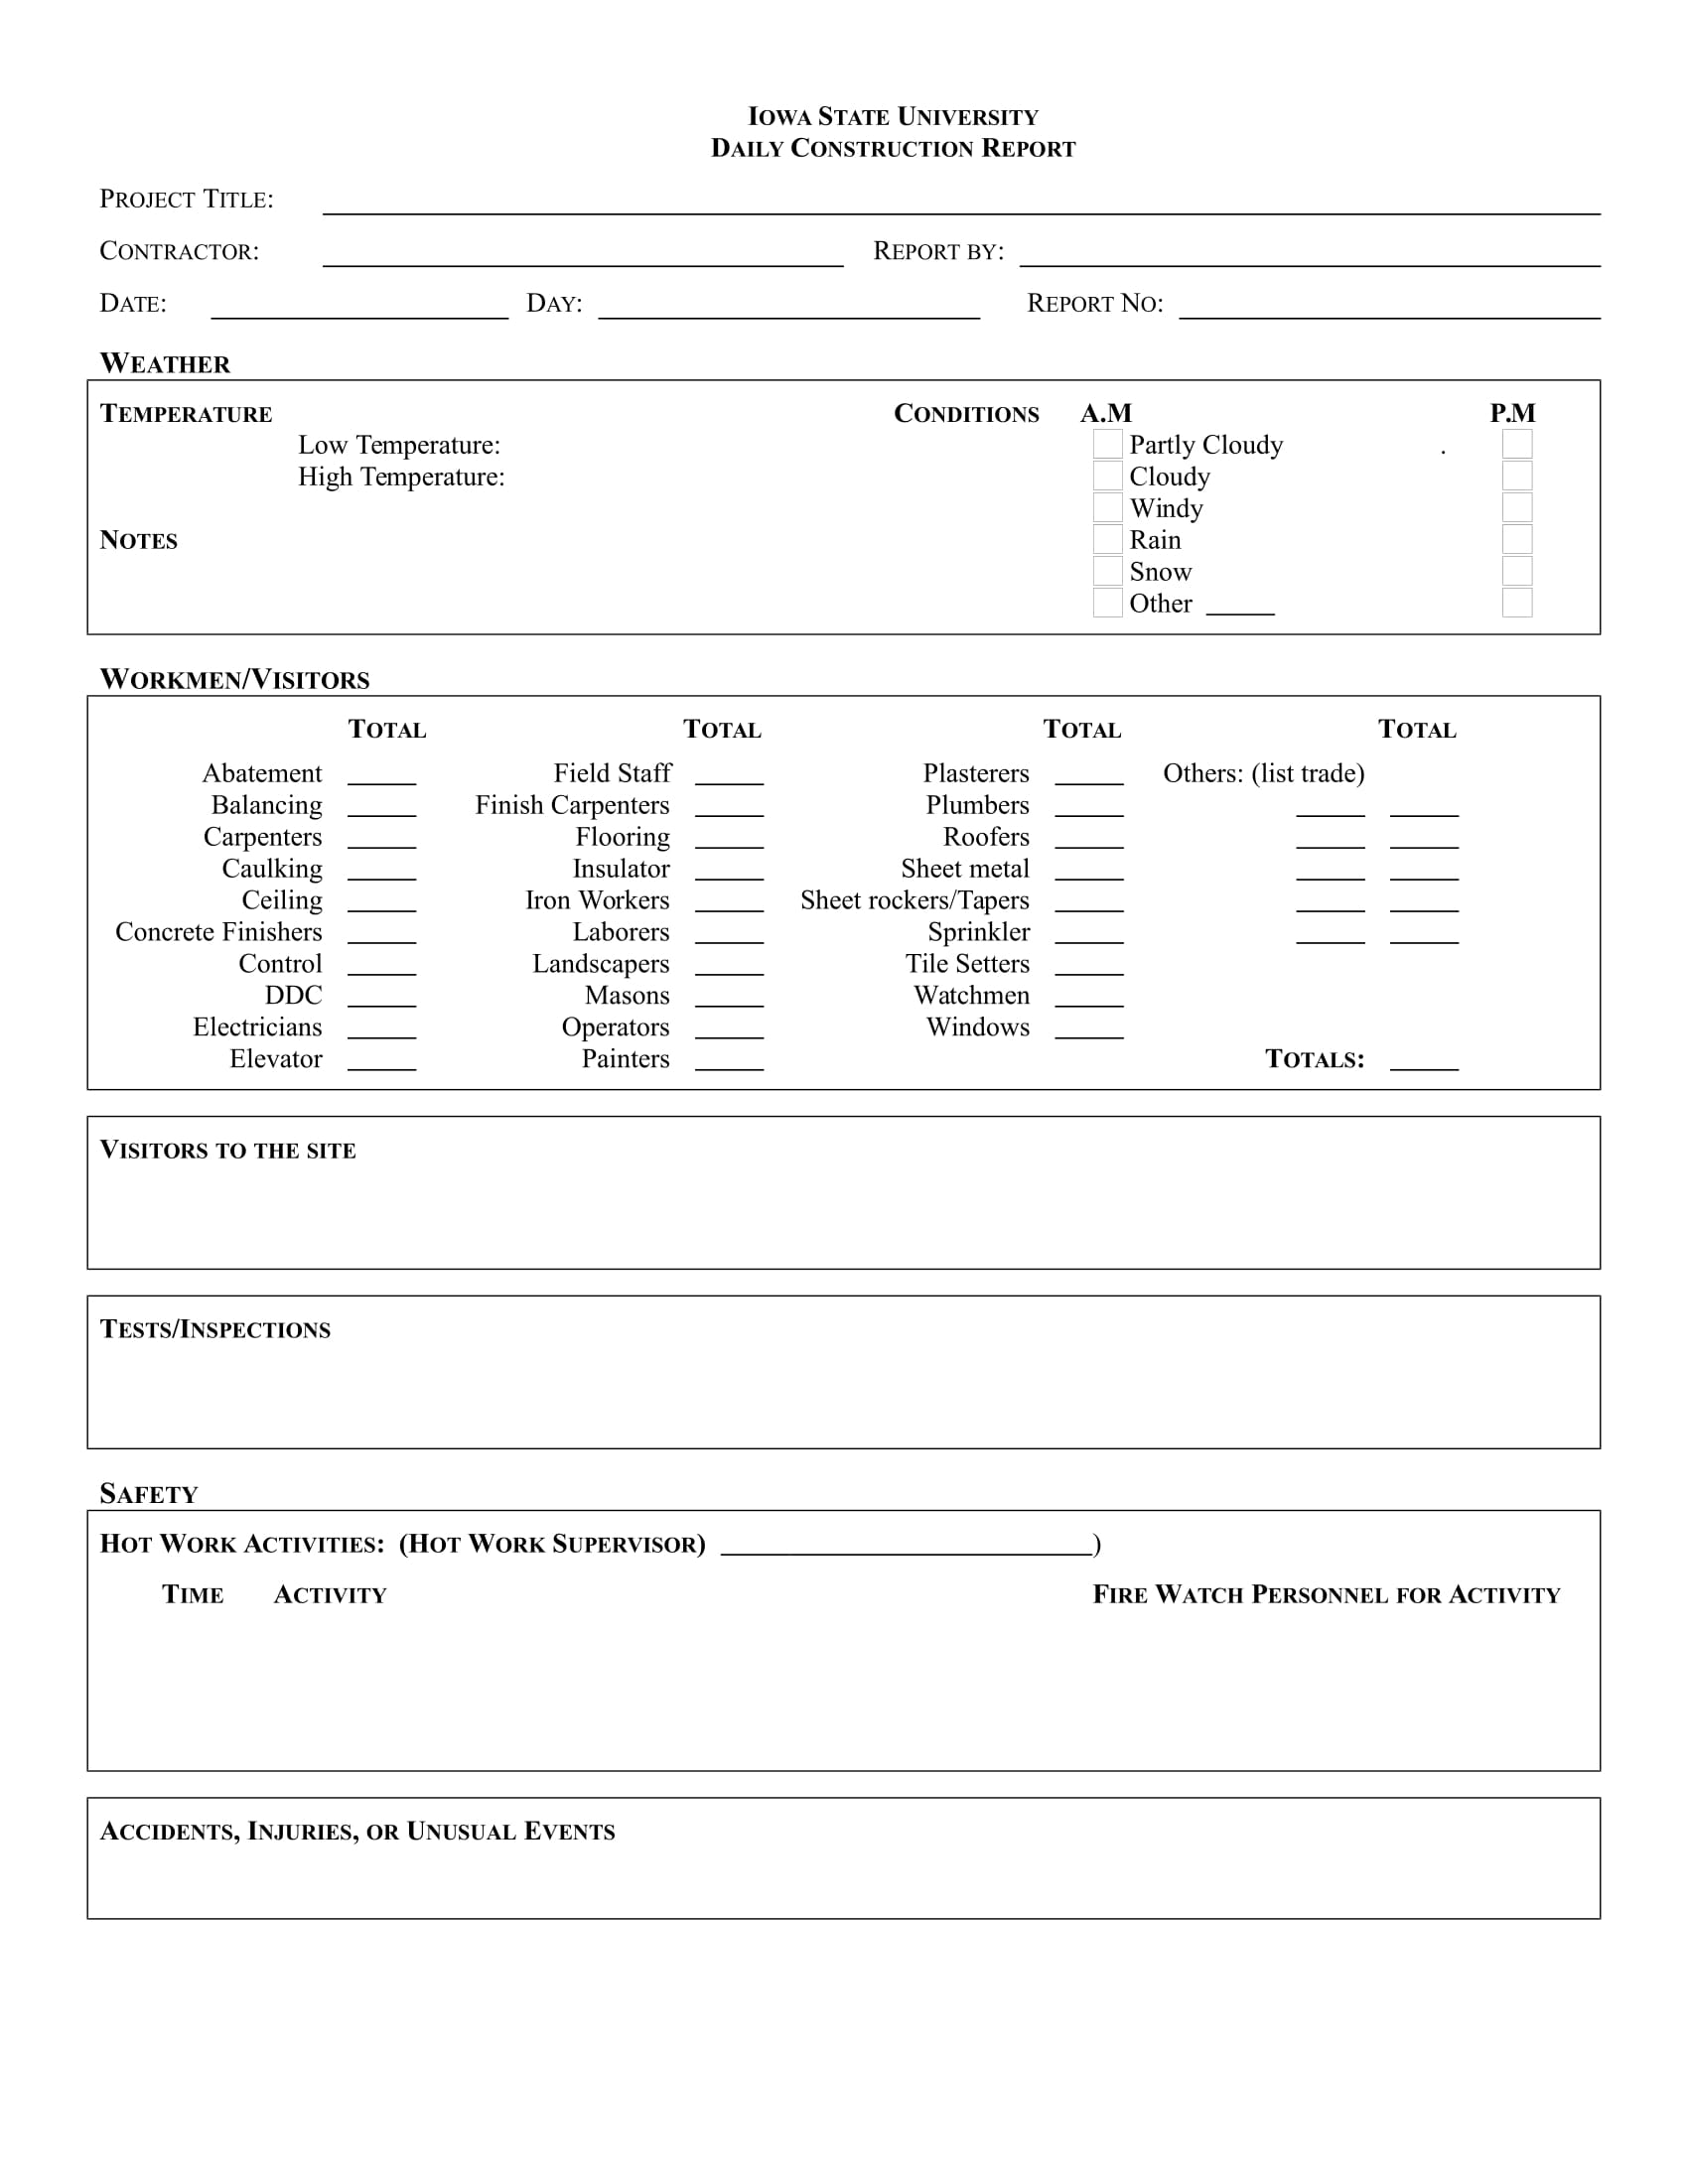 daily construction report form 1